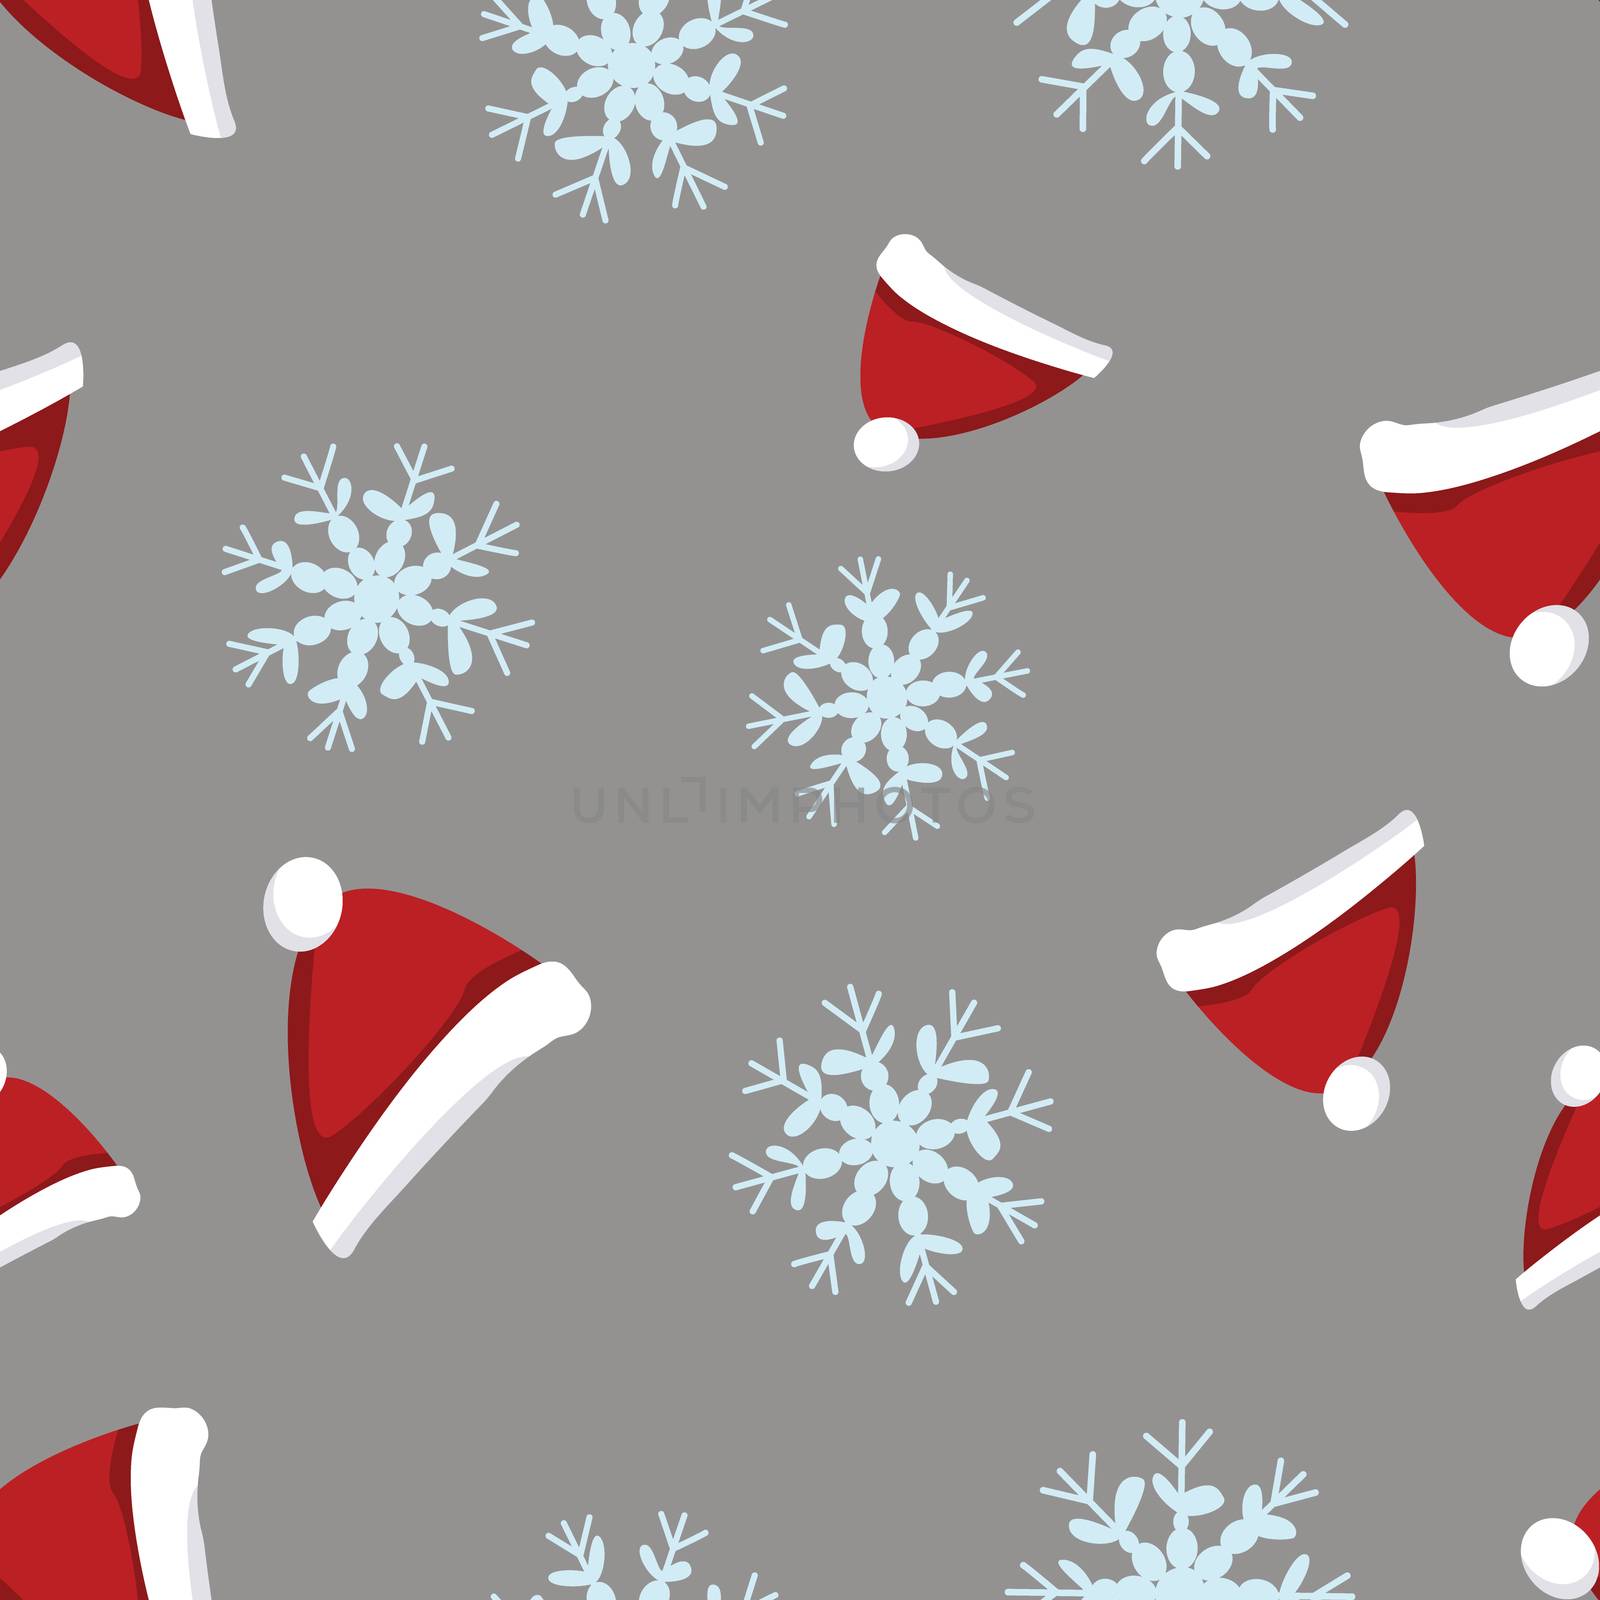 Christmas red hats and snowflakes seamless pattern. Festive endless design. Holiday decor wrapping paper, background. Colorful vector illustration in flat cartoon style.